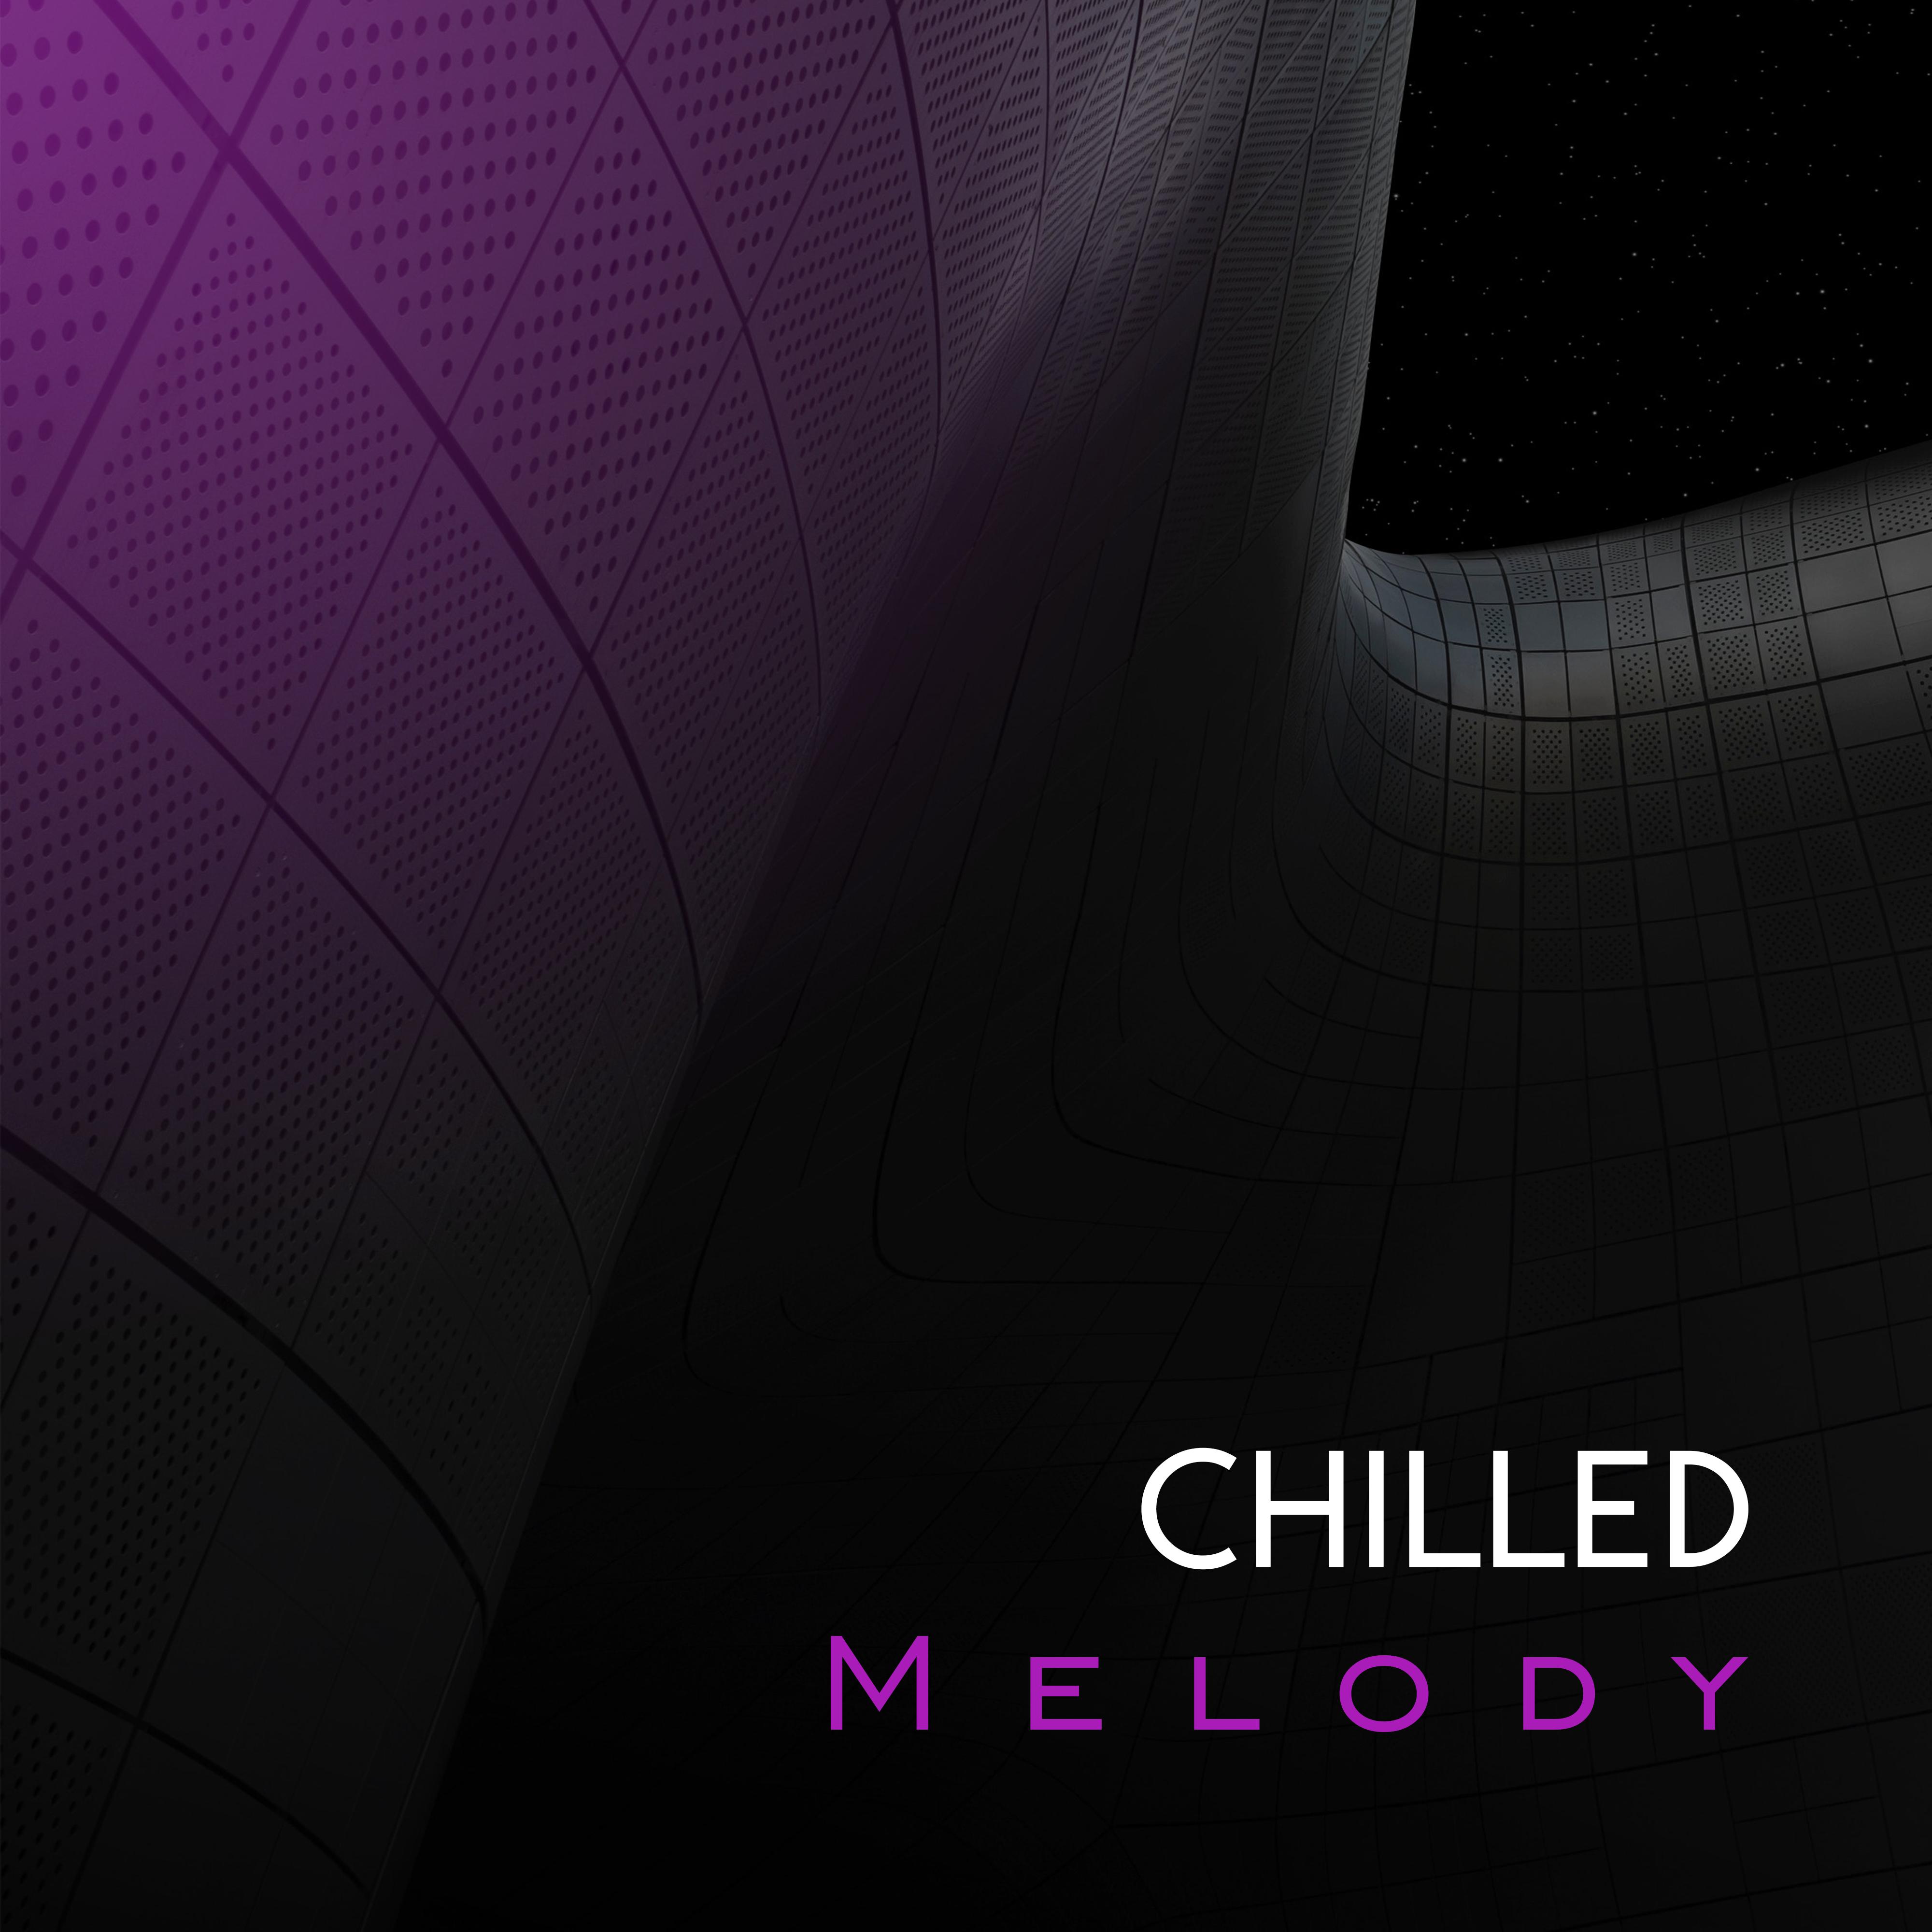 Chilled Melody – Jazz Vibes, Instrumental Jazz to Relax, Soothing Sounds, Smooth Jazz Reduces Stress